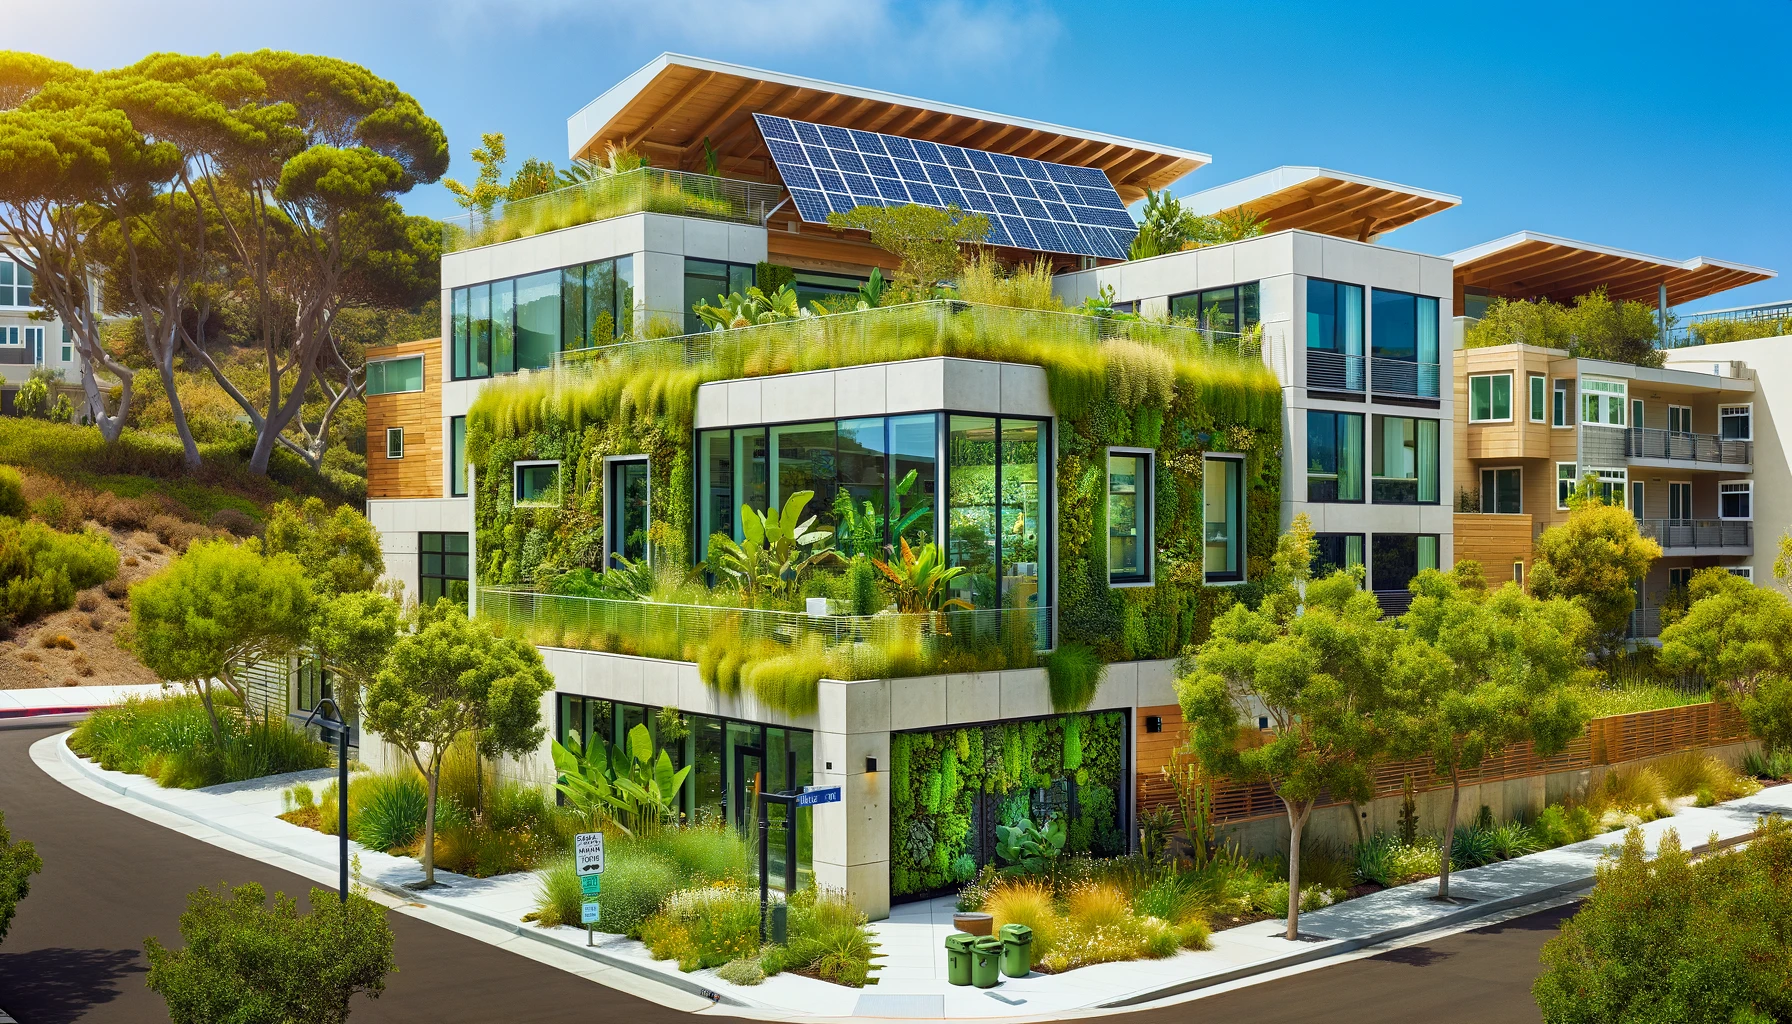 A modern, eco-friendly building in Encinitas, CA, surrounded by lush greenery and solar panels.